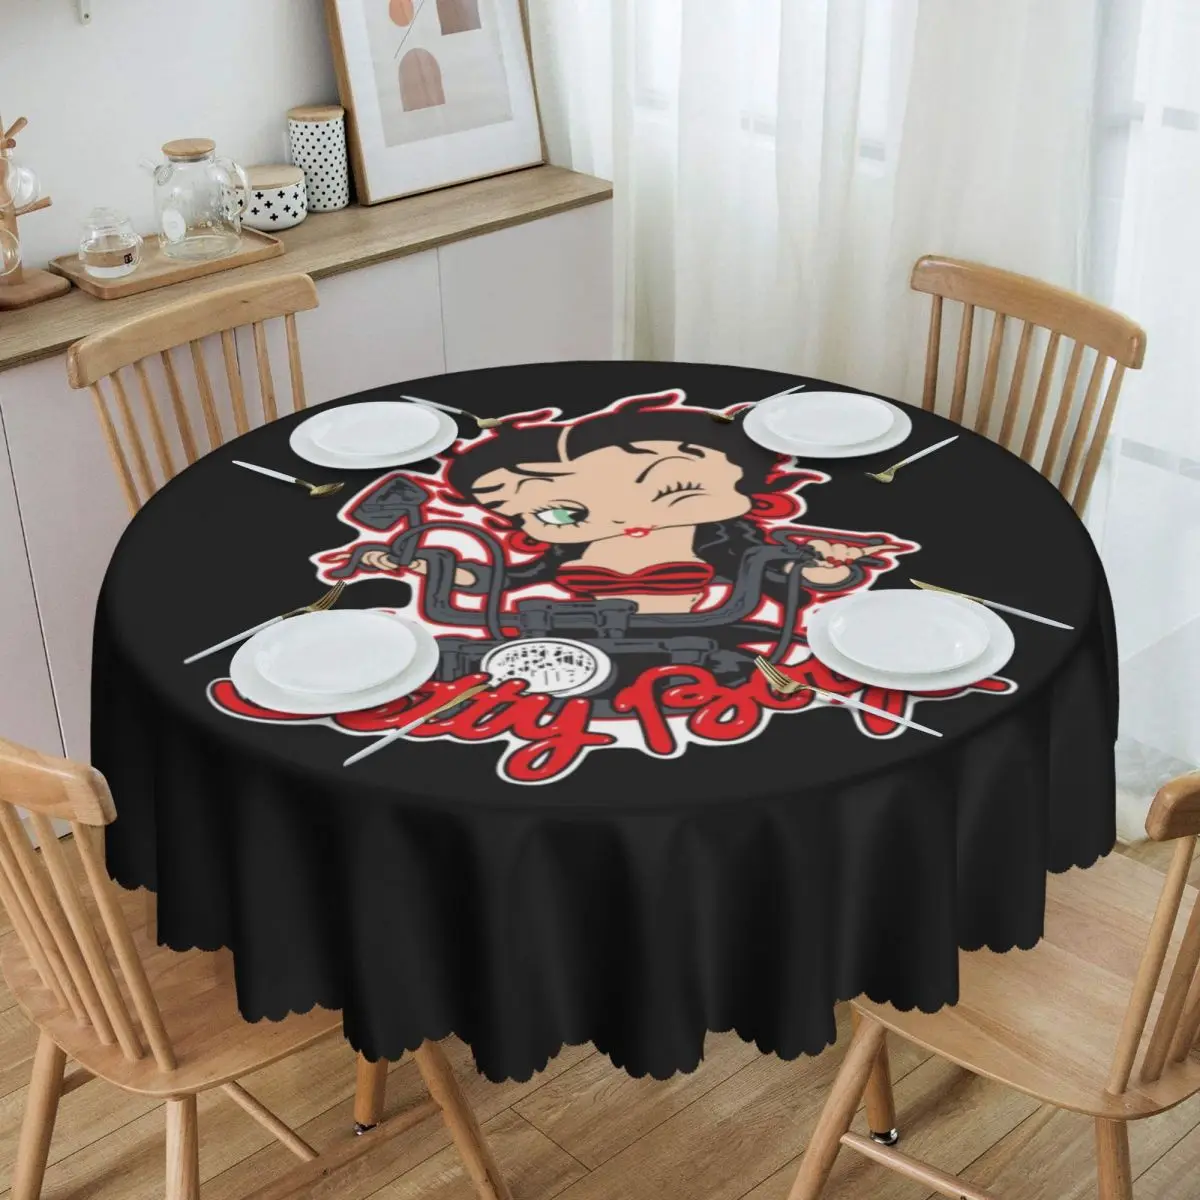 

Cartoon Rider Girl Tablecloth Round Oilproof Bettys Boop Cute Girl Table Cover Cloth for Party 60 inches